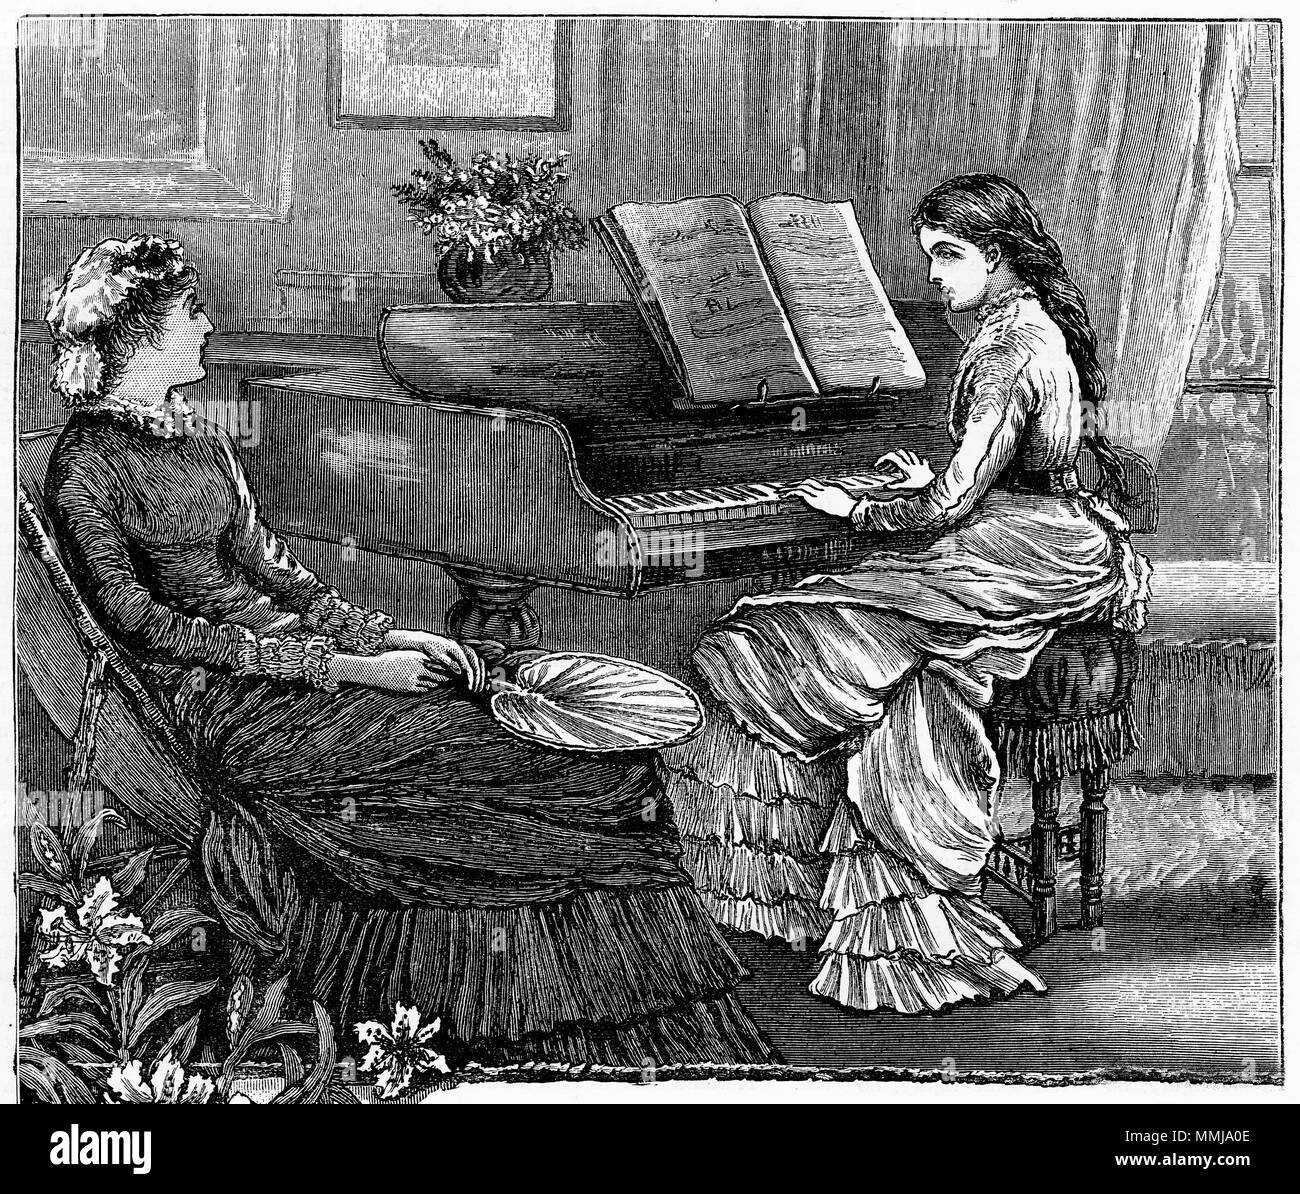 Engraving of a young woman playing a piano. From an original engraving in the Girl's Own Paper magazine 1883. Stock Photo